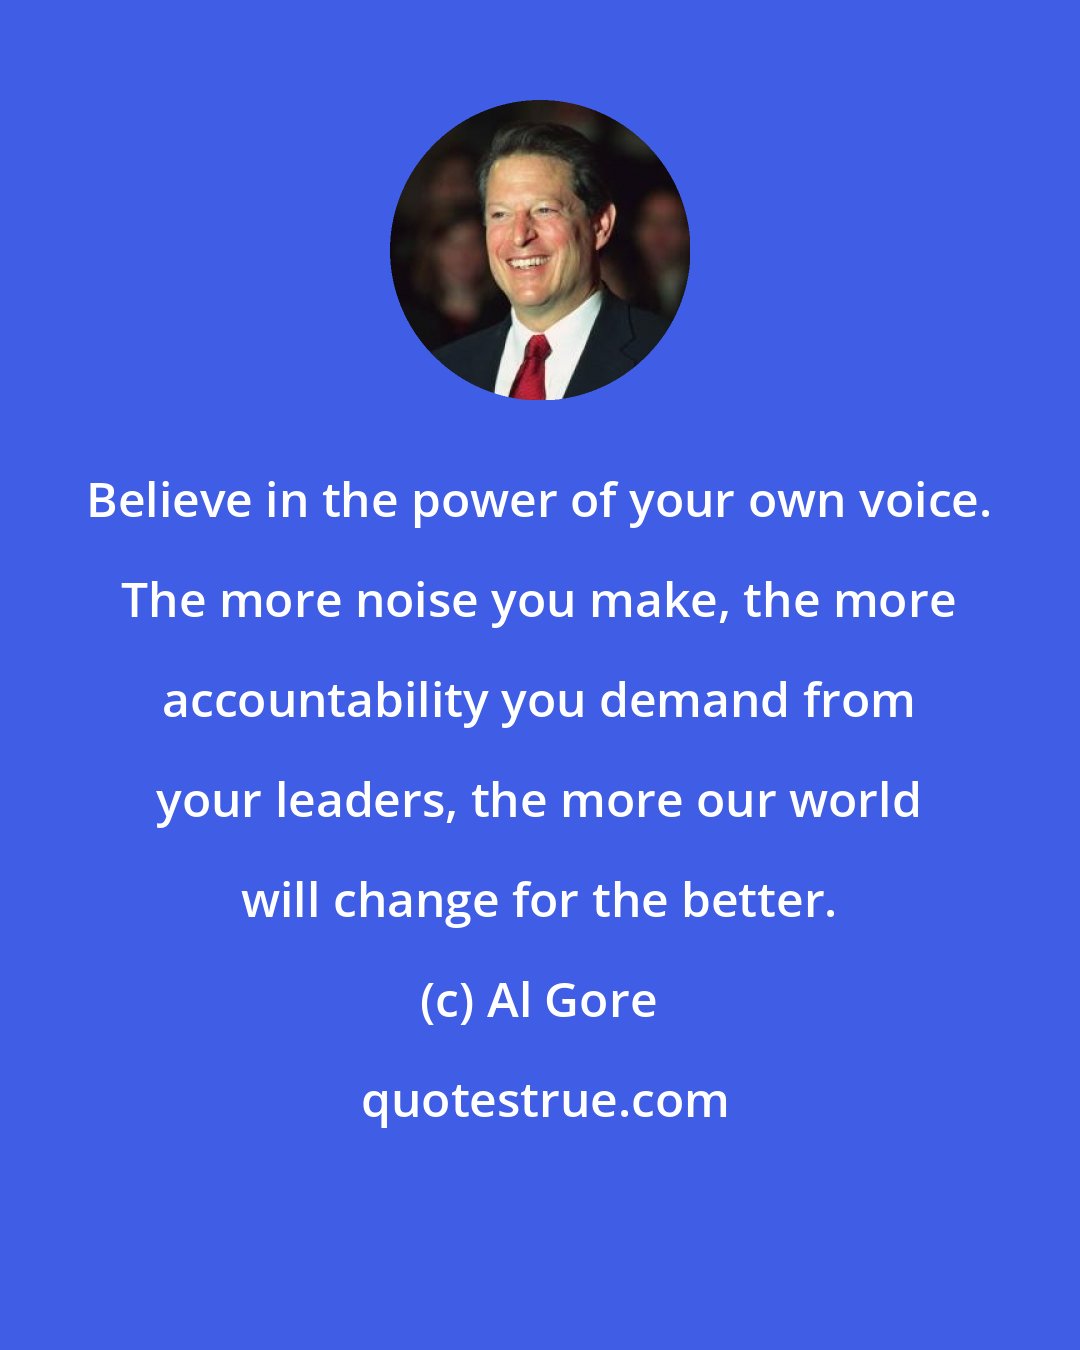 Al Gore: Believe in the power of your own voice. The more noise you make, the more accountability you demand from your leaders, the more our world will change for the better.